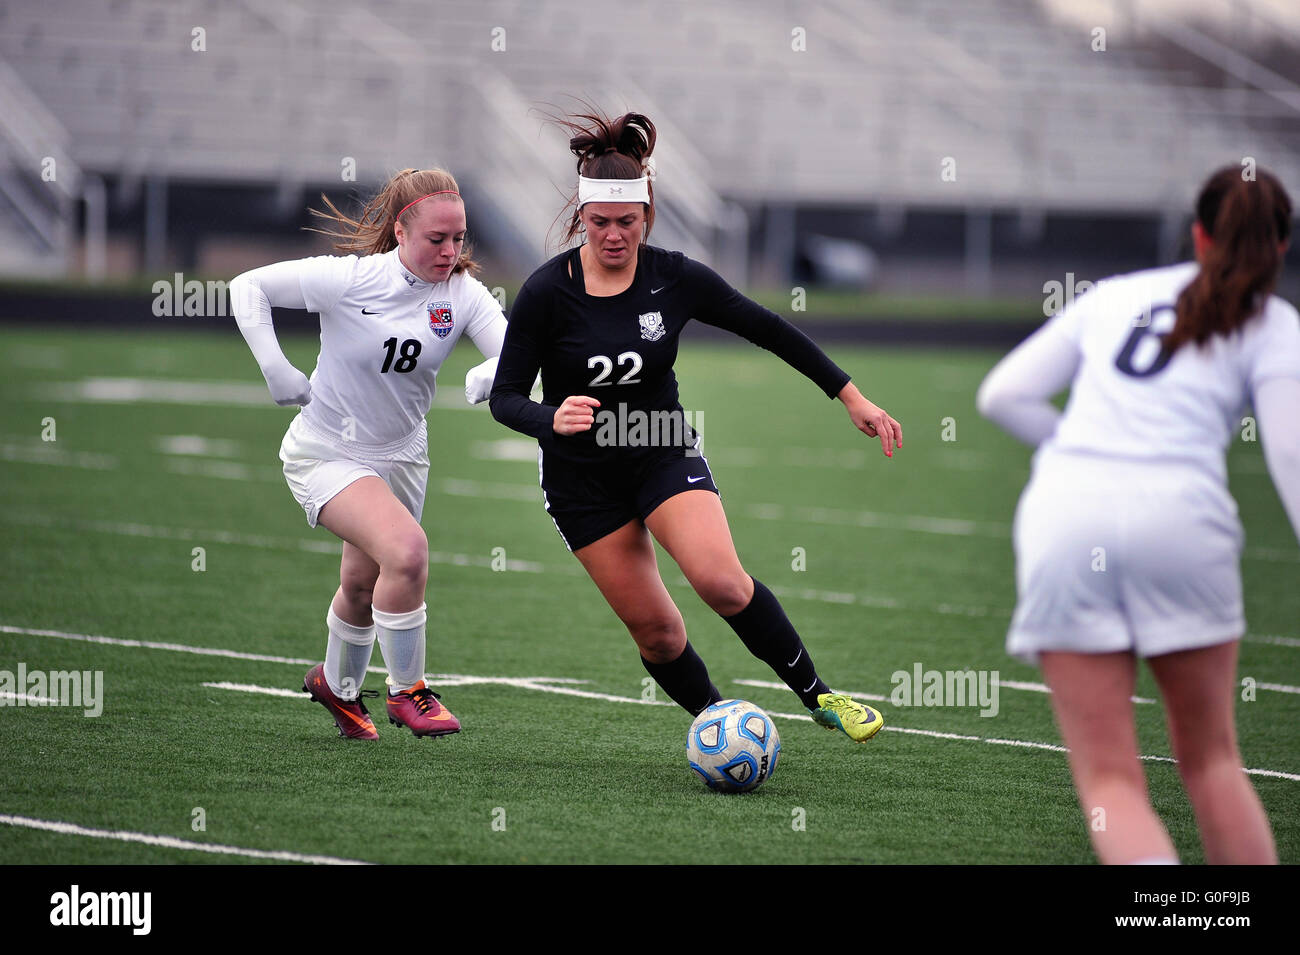 Midfielder dribbling among the opposing defense with while trying to get off a shot on goal during a high school soccer match. USA. Stock Photo